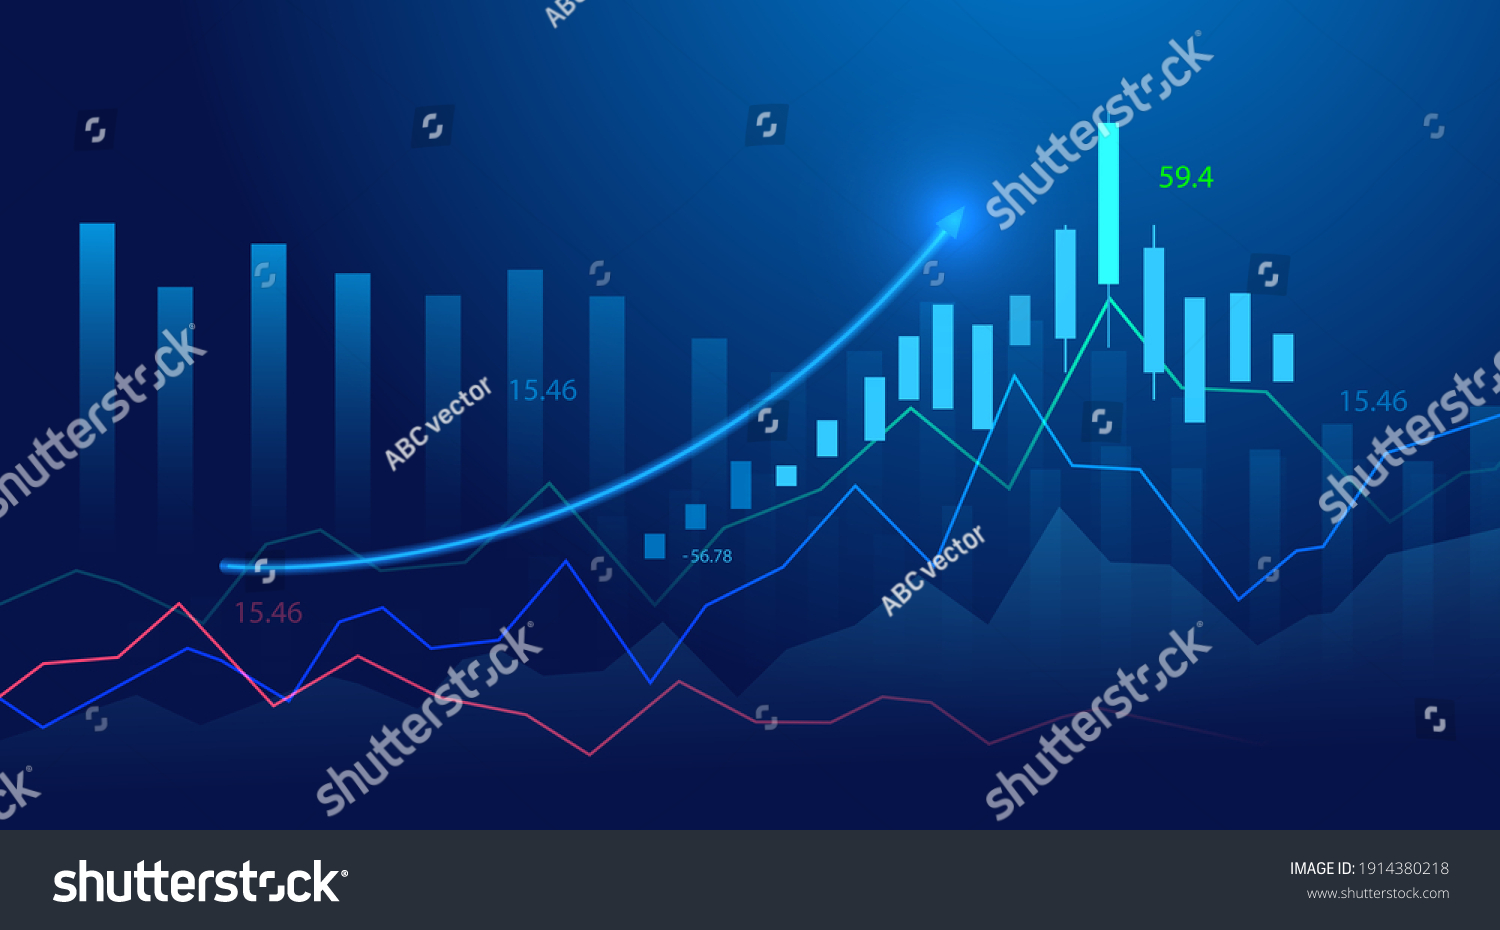 SVG of Business candle stick graph chart of stock market investment trading on blue background. Bullish point, up trend of graph. Economy vector design svg